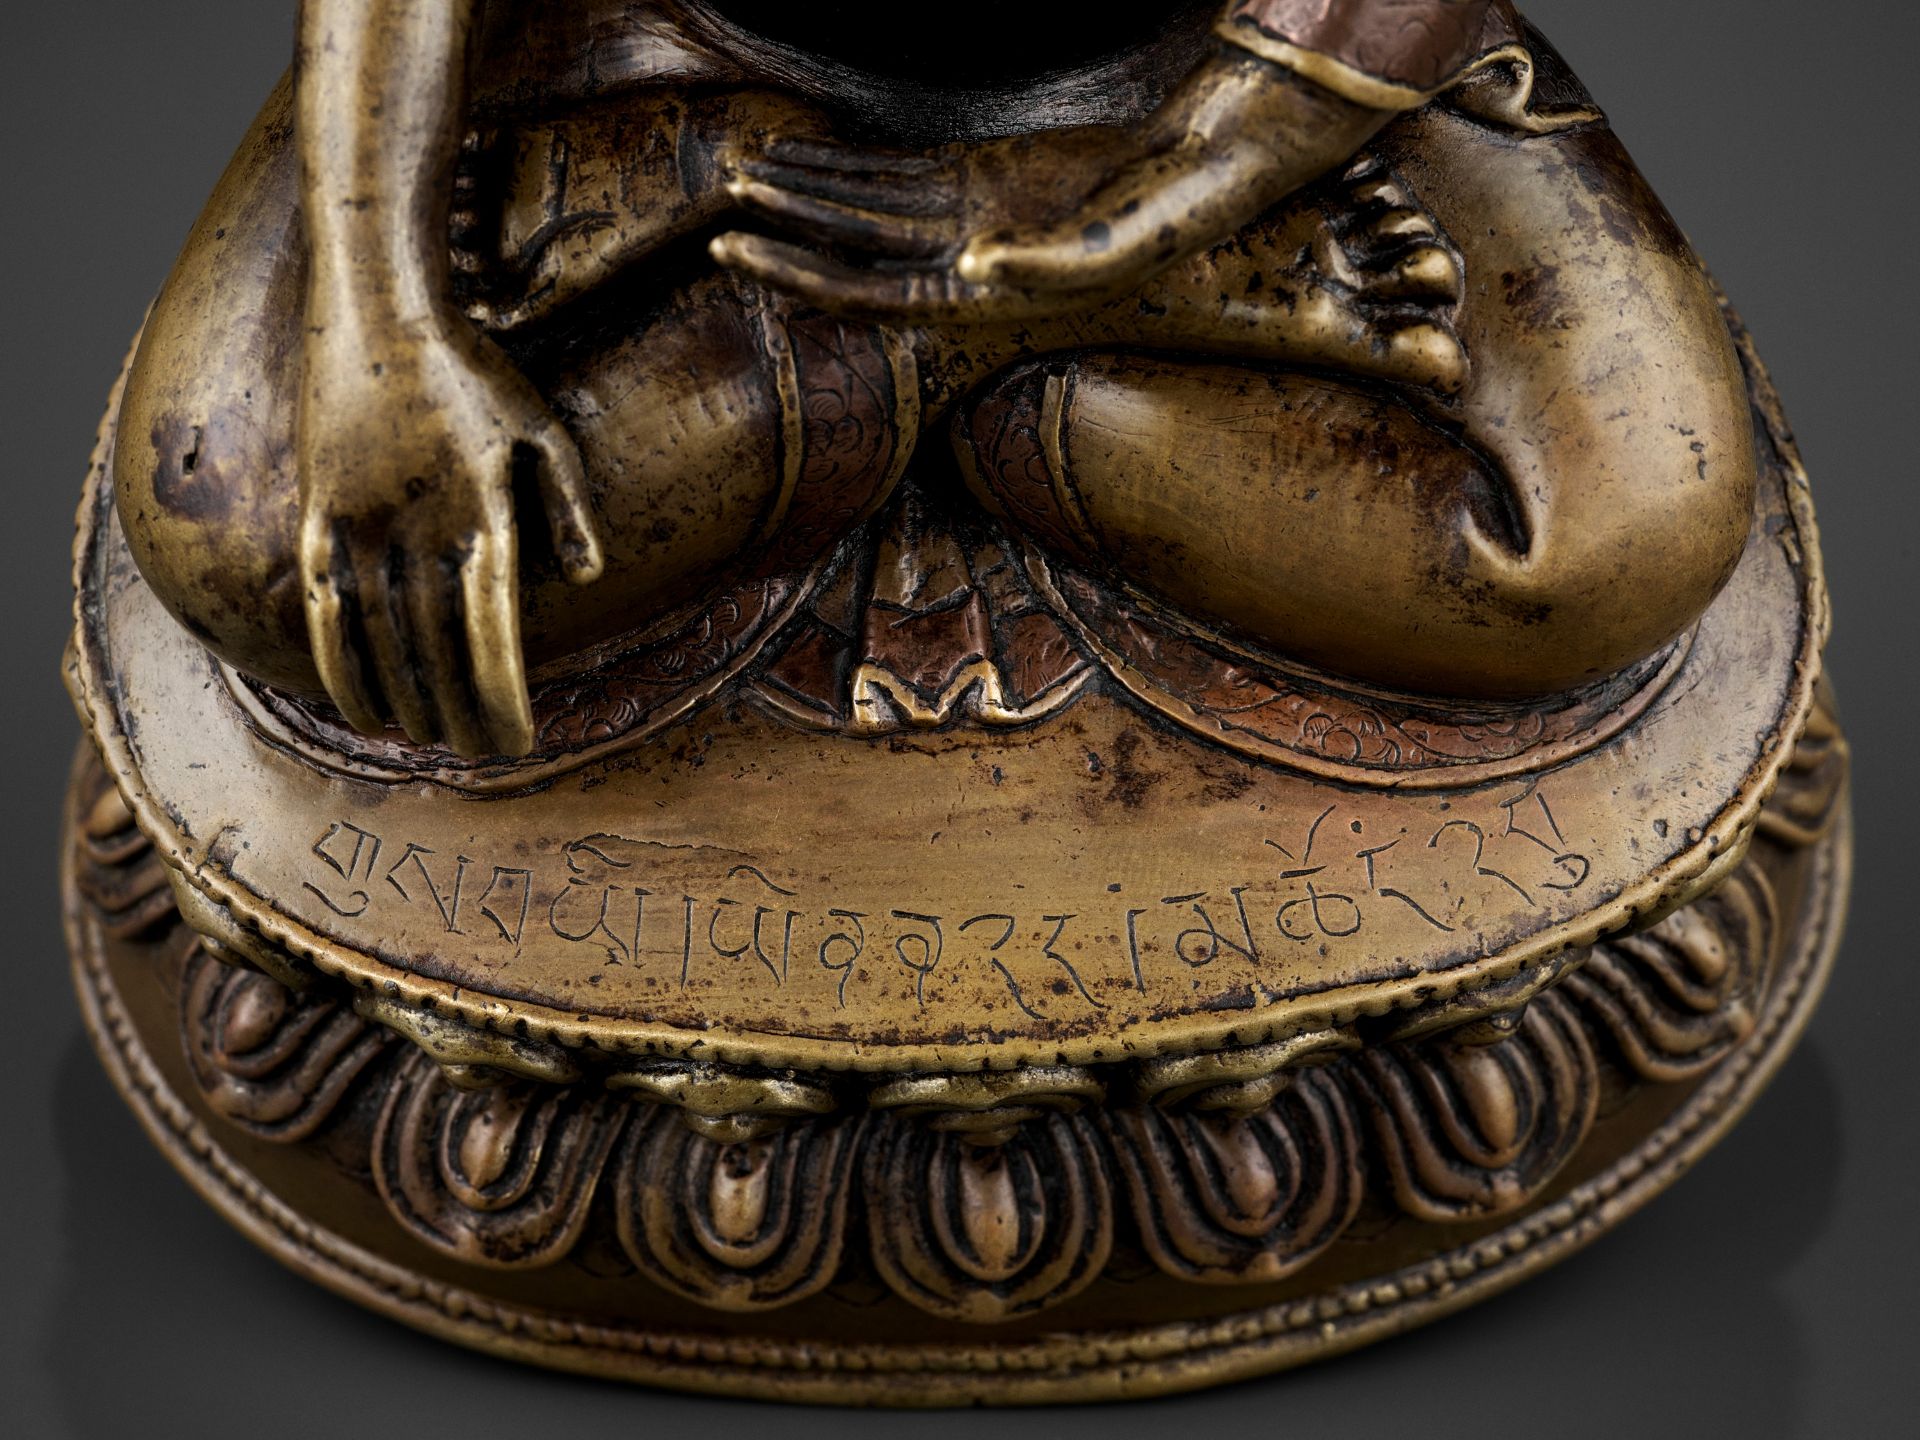 A PORTRAIT BRONZE OF A MONK, COPPER- AND SILVER-INLAID, 16TH-18TH CENTURY - Image 4 of 12